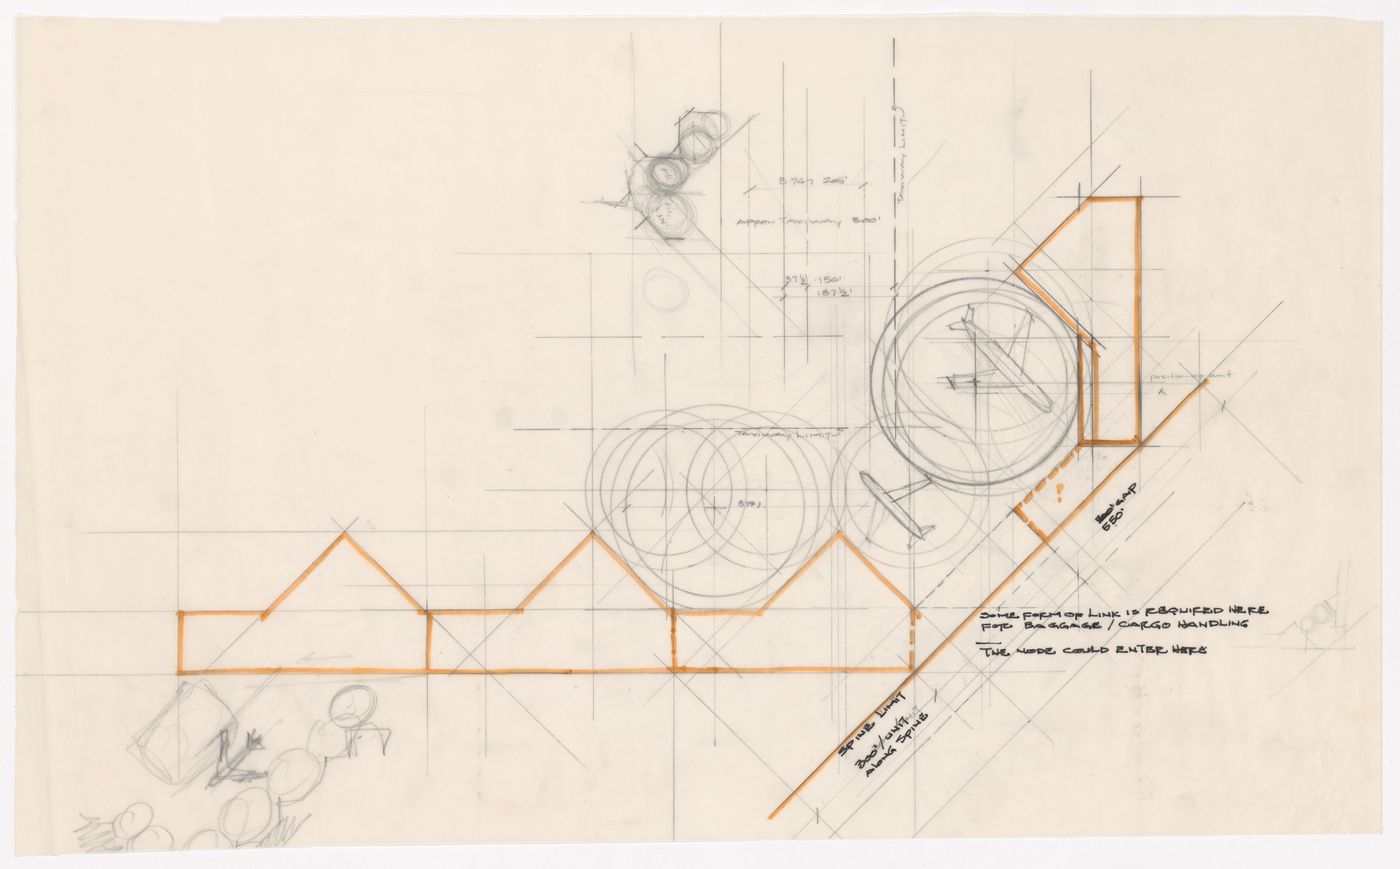 Sketch plan with notes for Montreal International Airport, Montreal